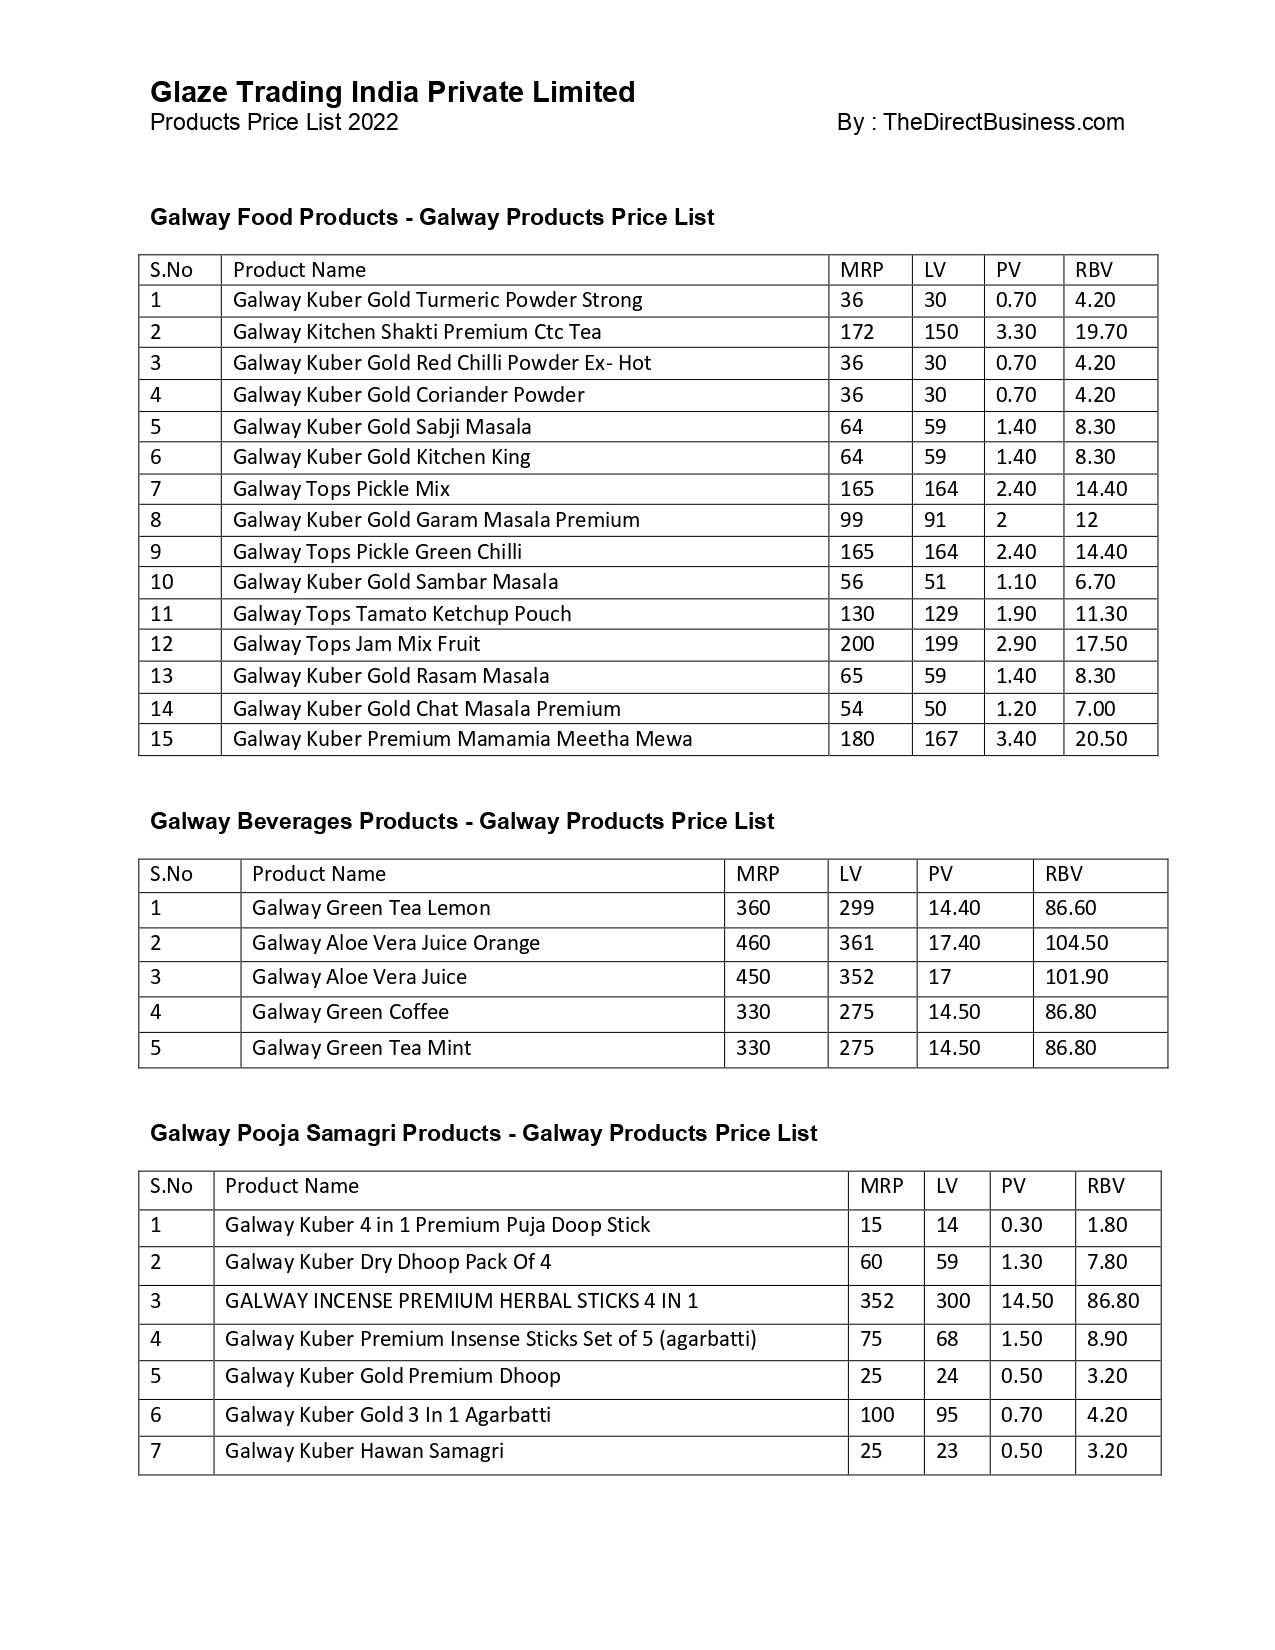 Galway Products Price List Image 4